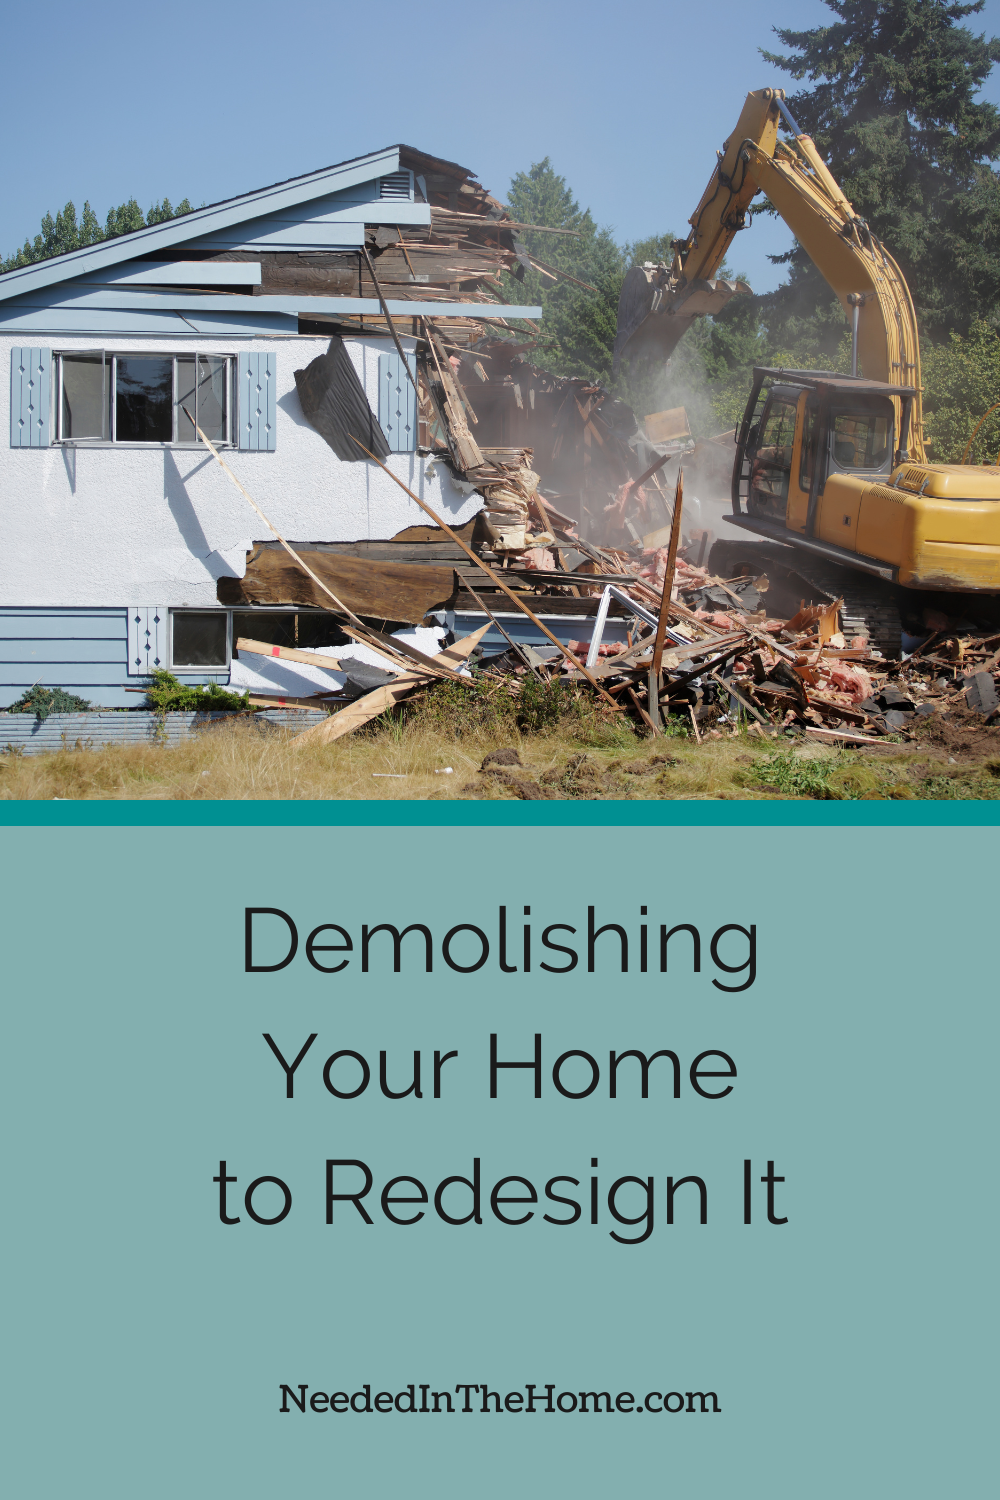 pinterest pin description demolishing your home to redesign it heavy equipment knocking corner wall out of a home neededinthehome